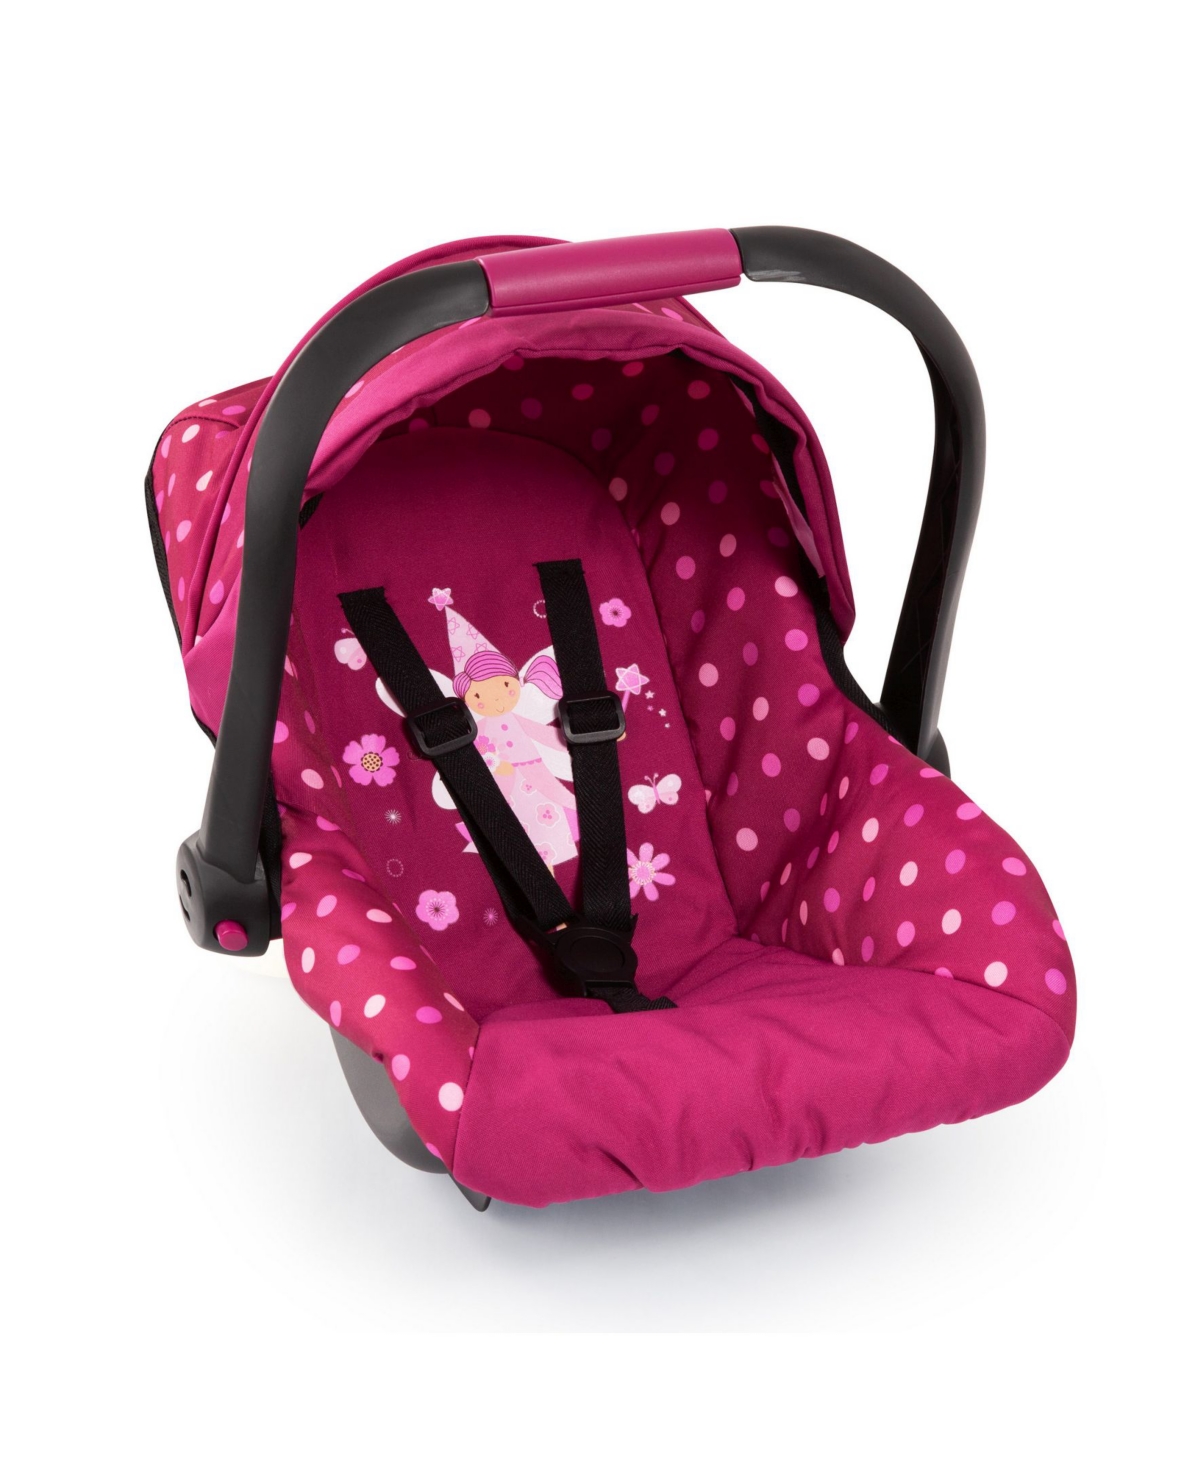 Redbox Baby Doll Deluxe Car Seat With Canopy In Polka Dots